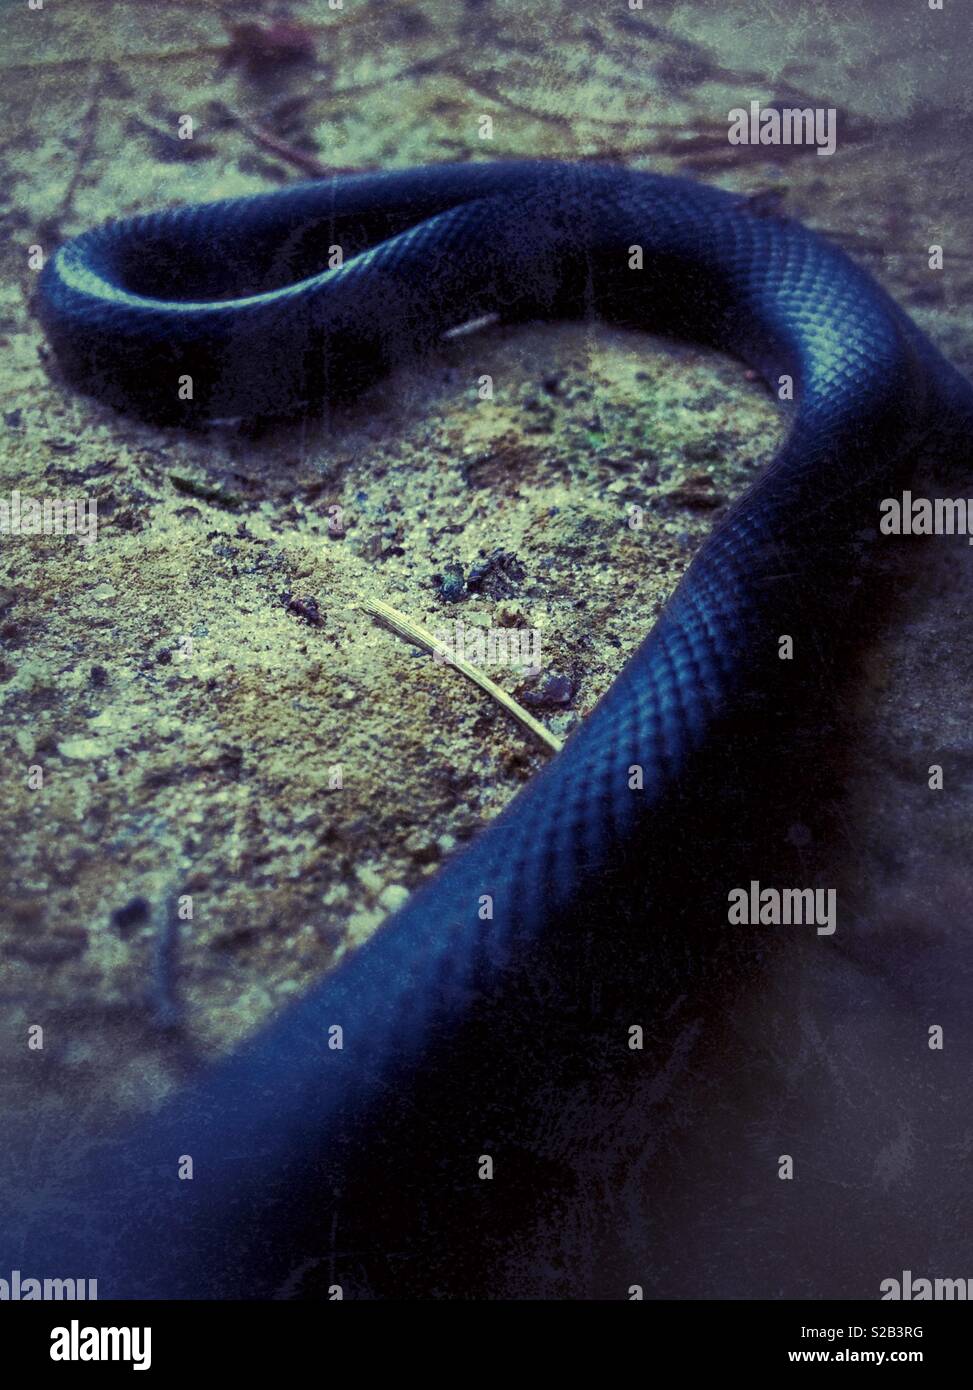 Grunge photo of a black snake on a dirt road Stock Photo